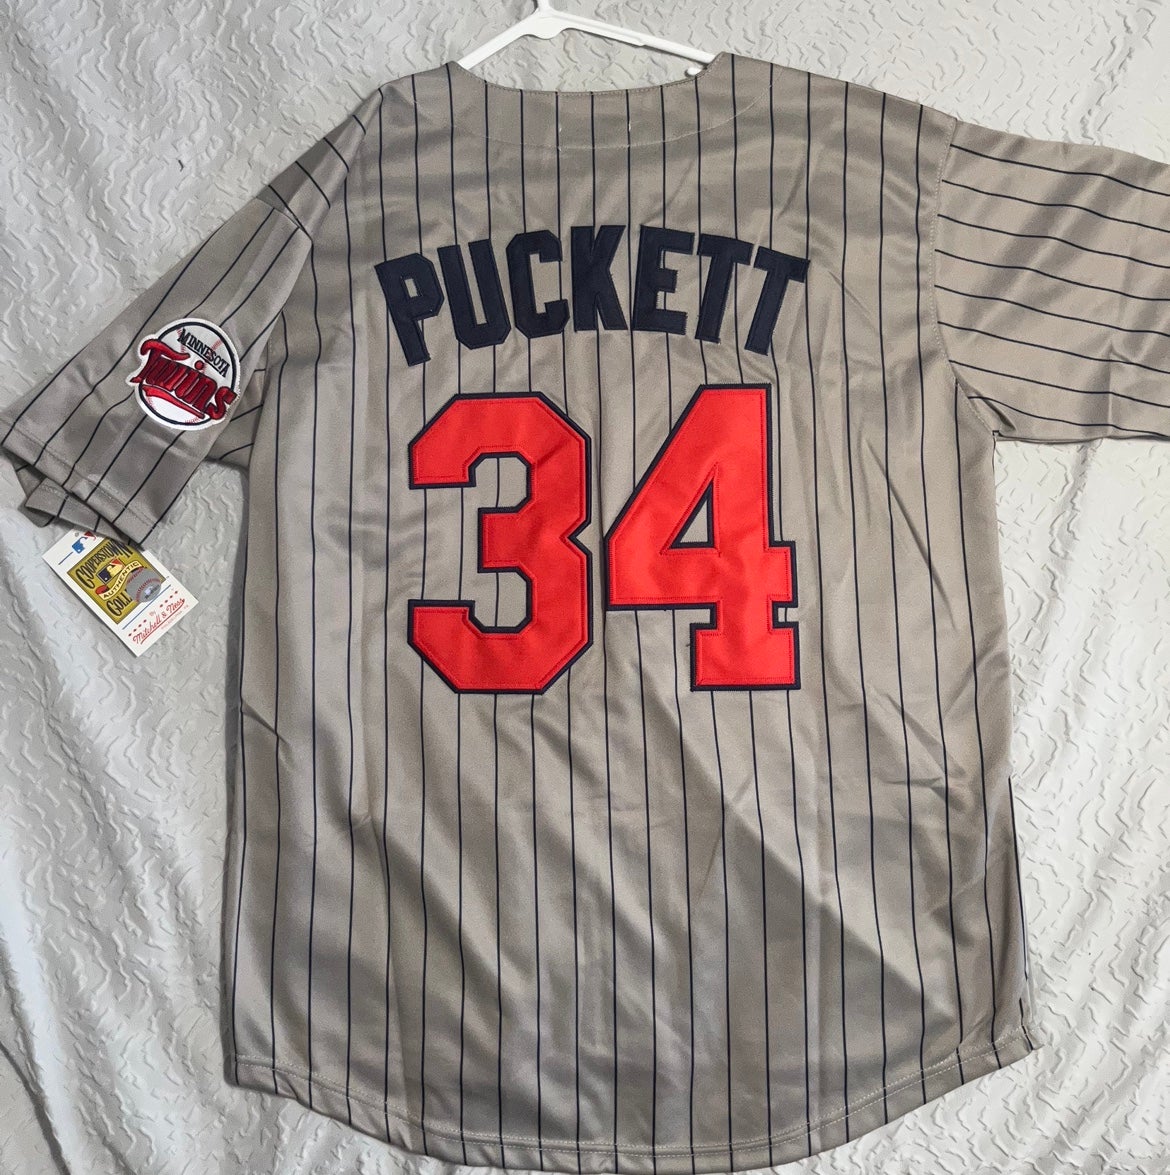 Men's Minnesota Twins #34 Kirby Puckett Retired 1969 Cream Pinstirpe  Mitchell & Ness Throwback Jersey on sale,for Cheap,wholesale from China